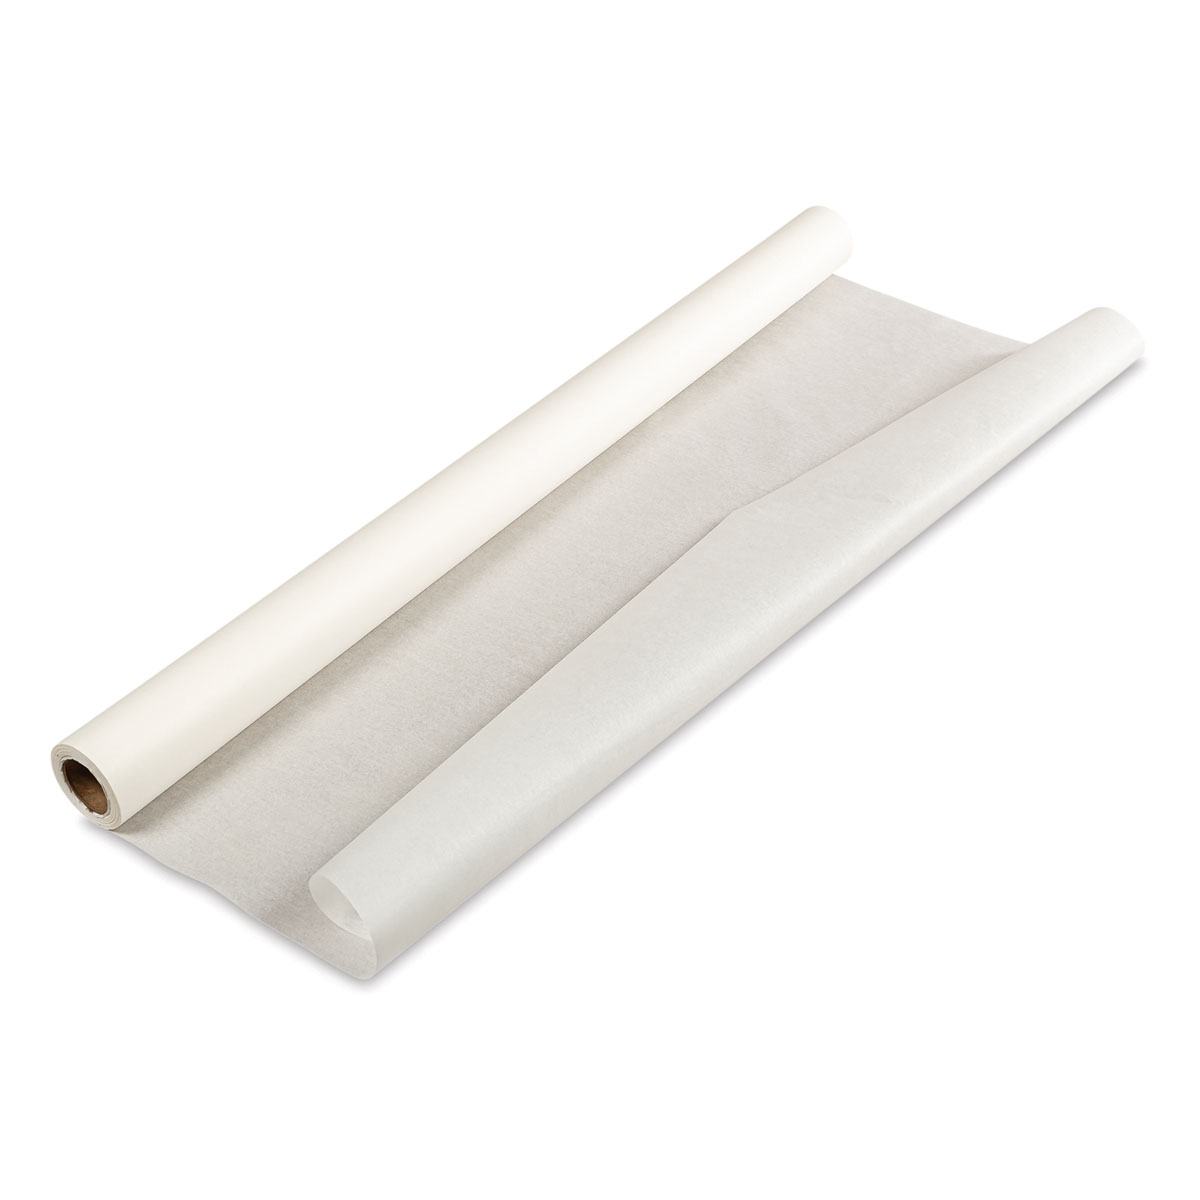 Blick Studio Tracing Paper Roll - 18 x 50 yds, White